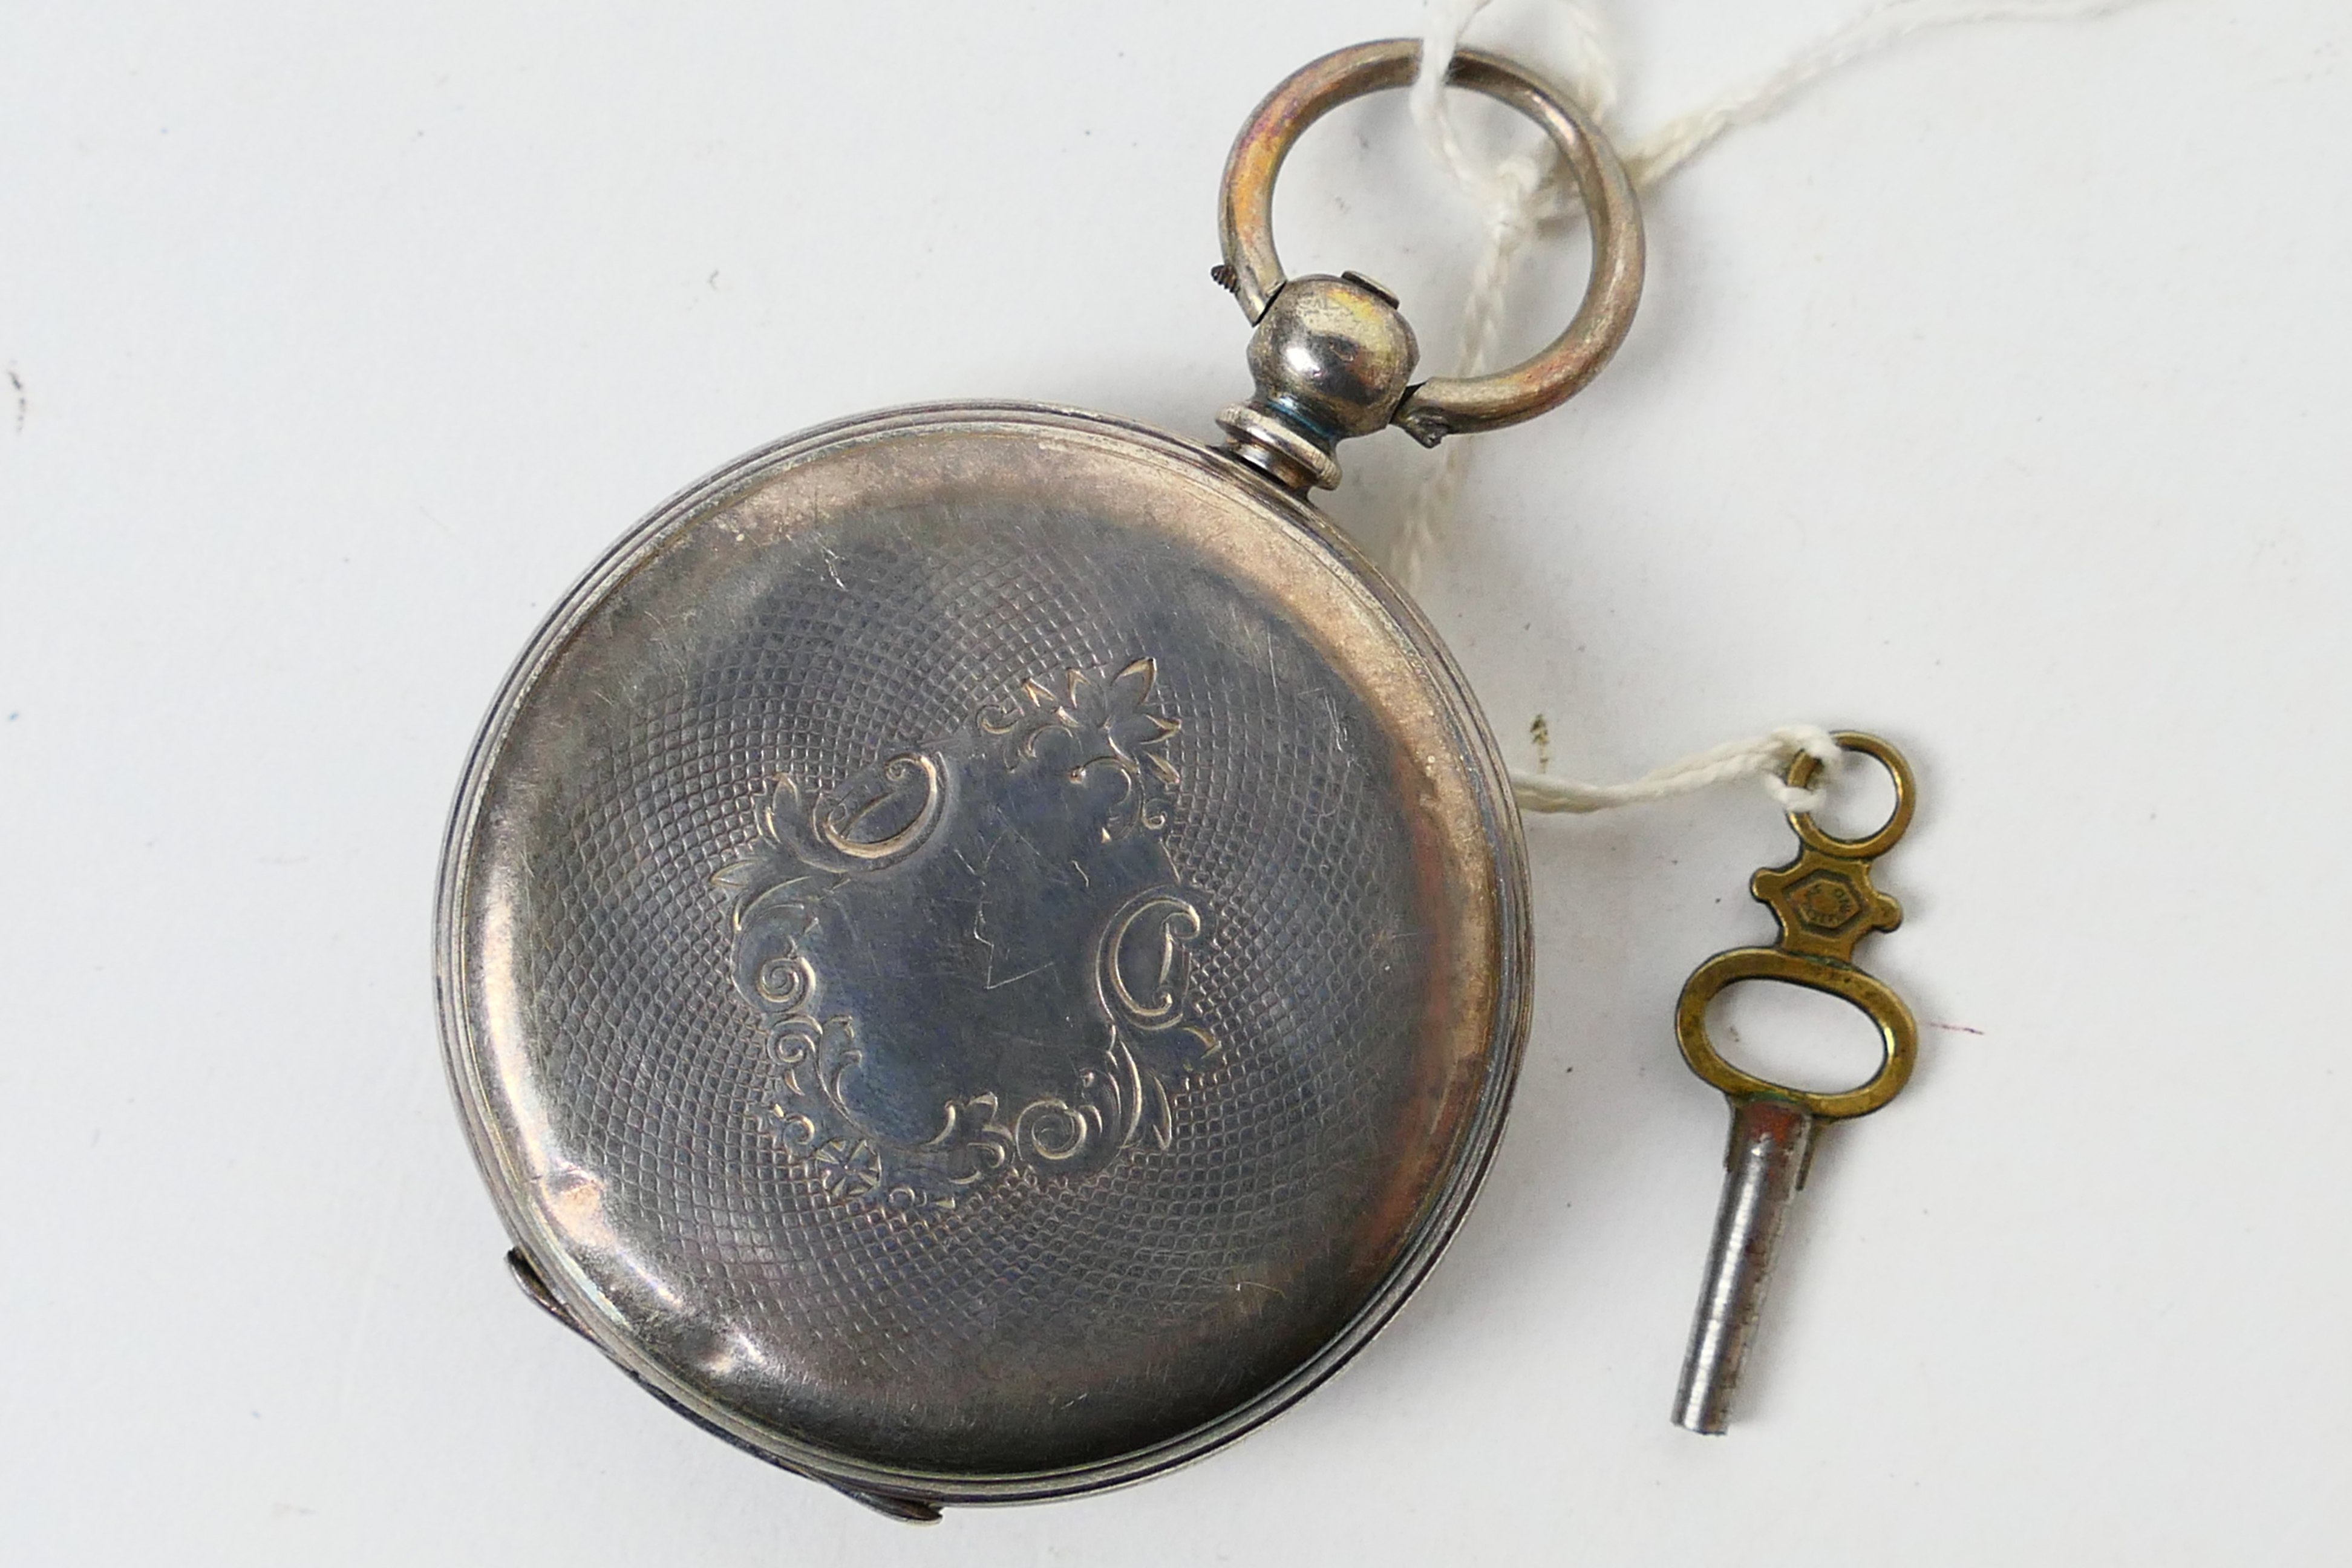 A Swiss silver (935 fineness) cased open face pocket watch, Roman numerals to a white enamel dial, - Image 3 of 6